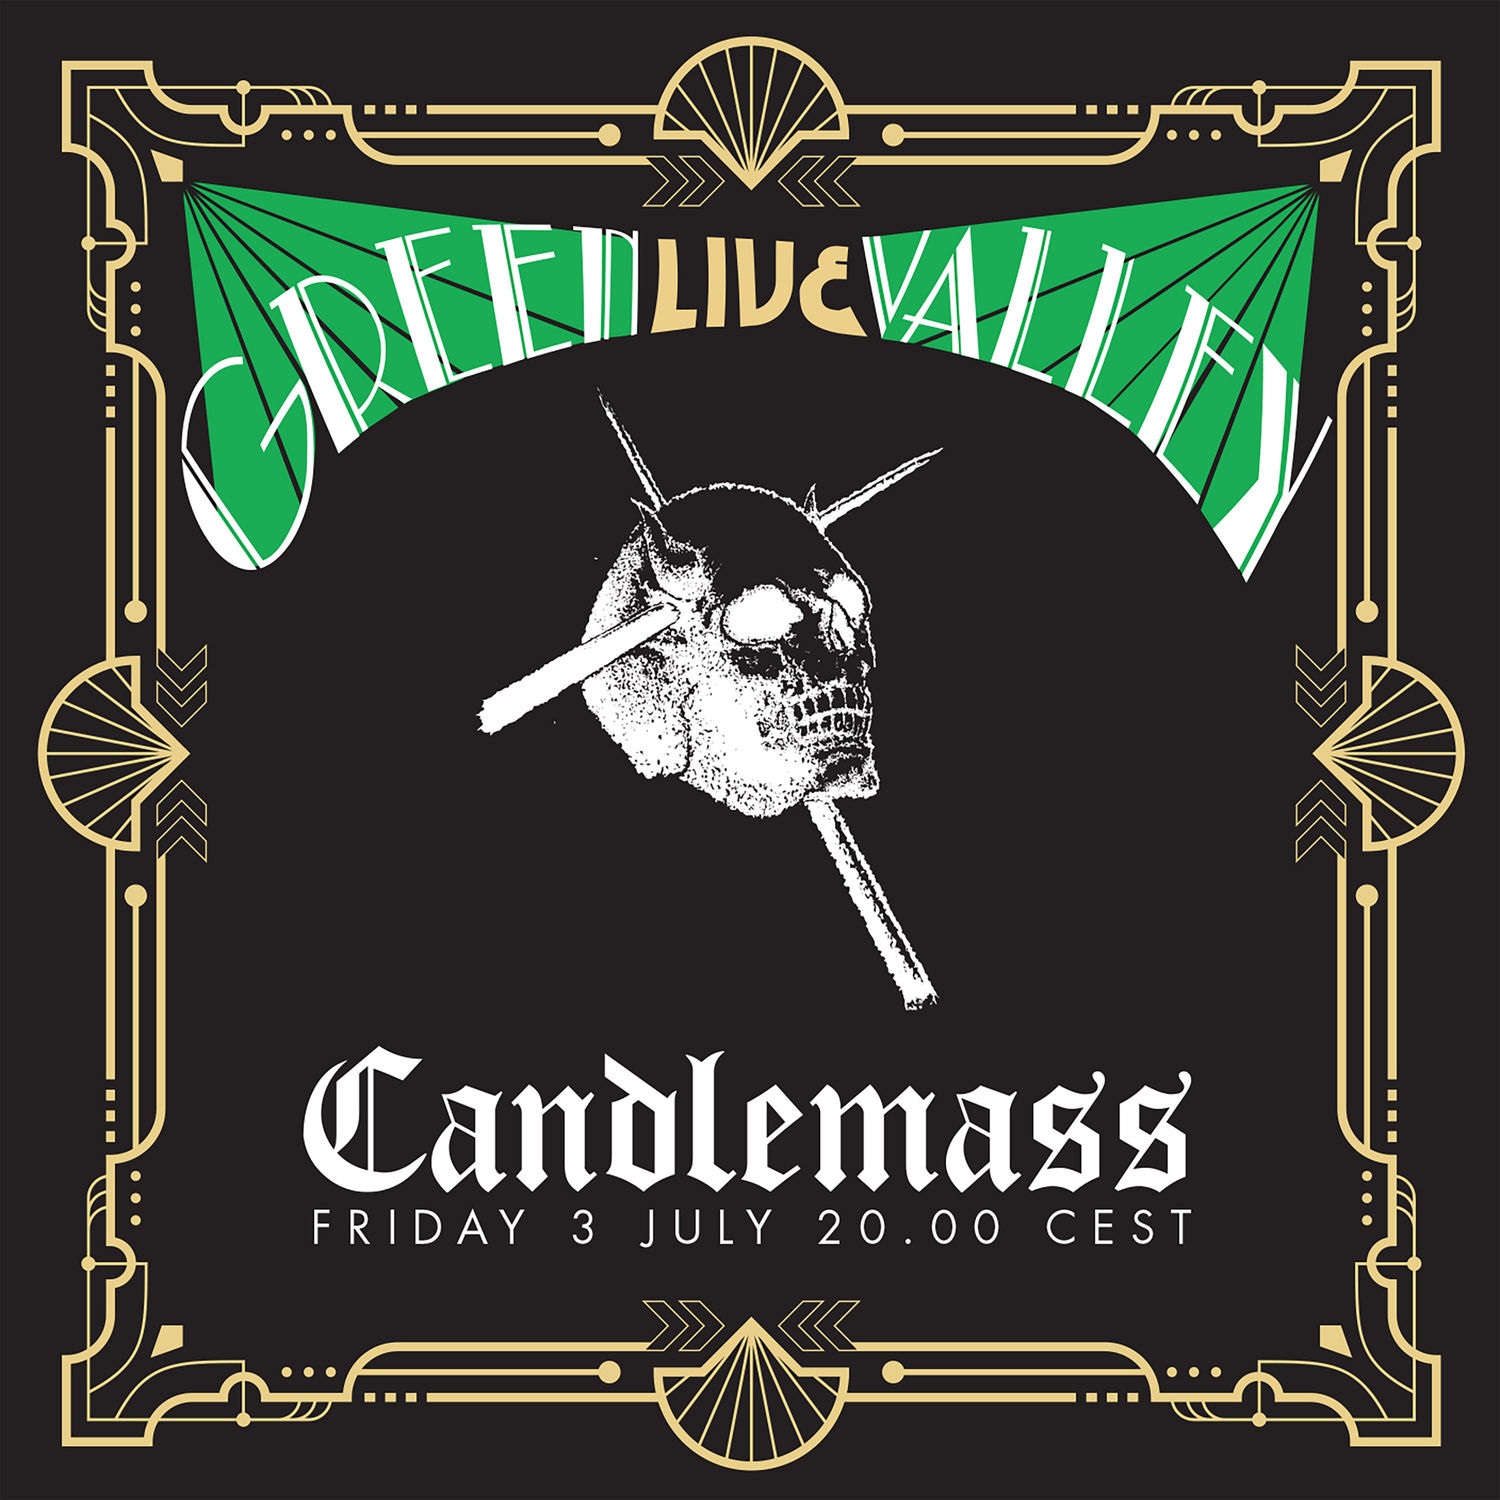 Candlemass – Green Valley (Live in Lockdown, July 3rd 2020) (2021) [FLAC 24bit/44,1kHz]